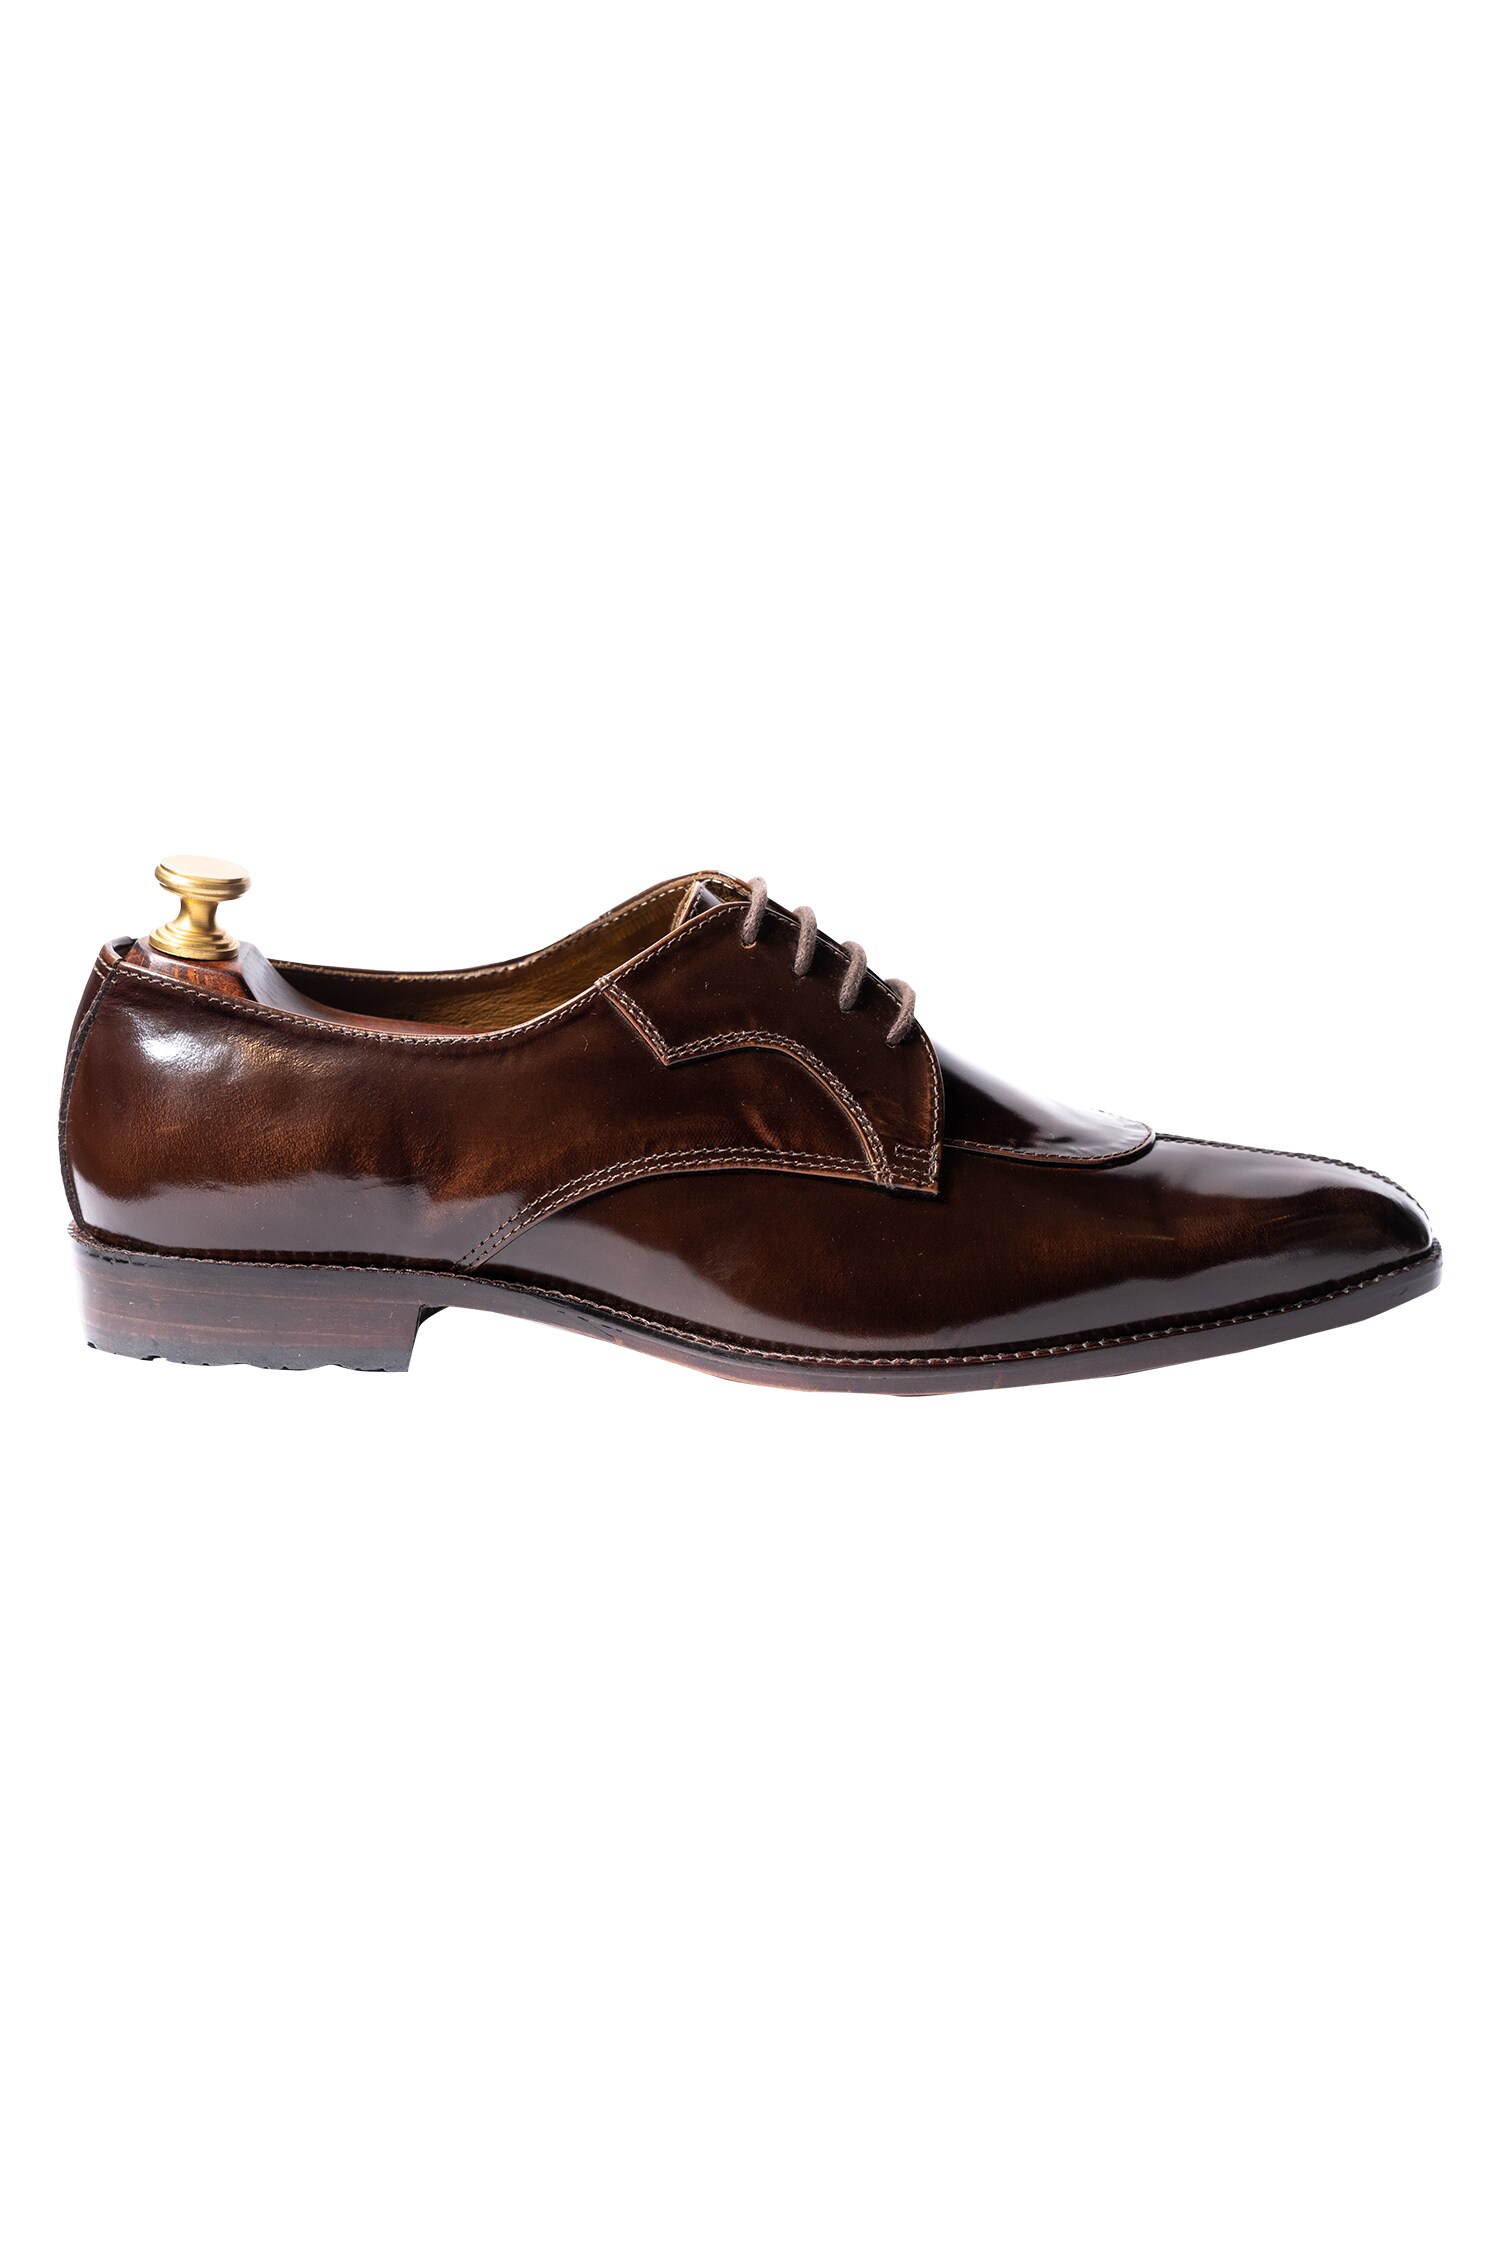 Buy Artimen Brown Leather Handcrafted Derby Shoes Online | Aza Fashions